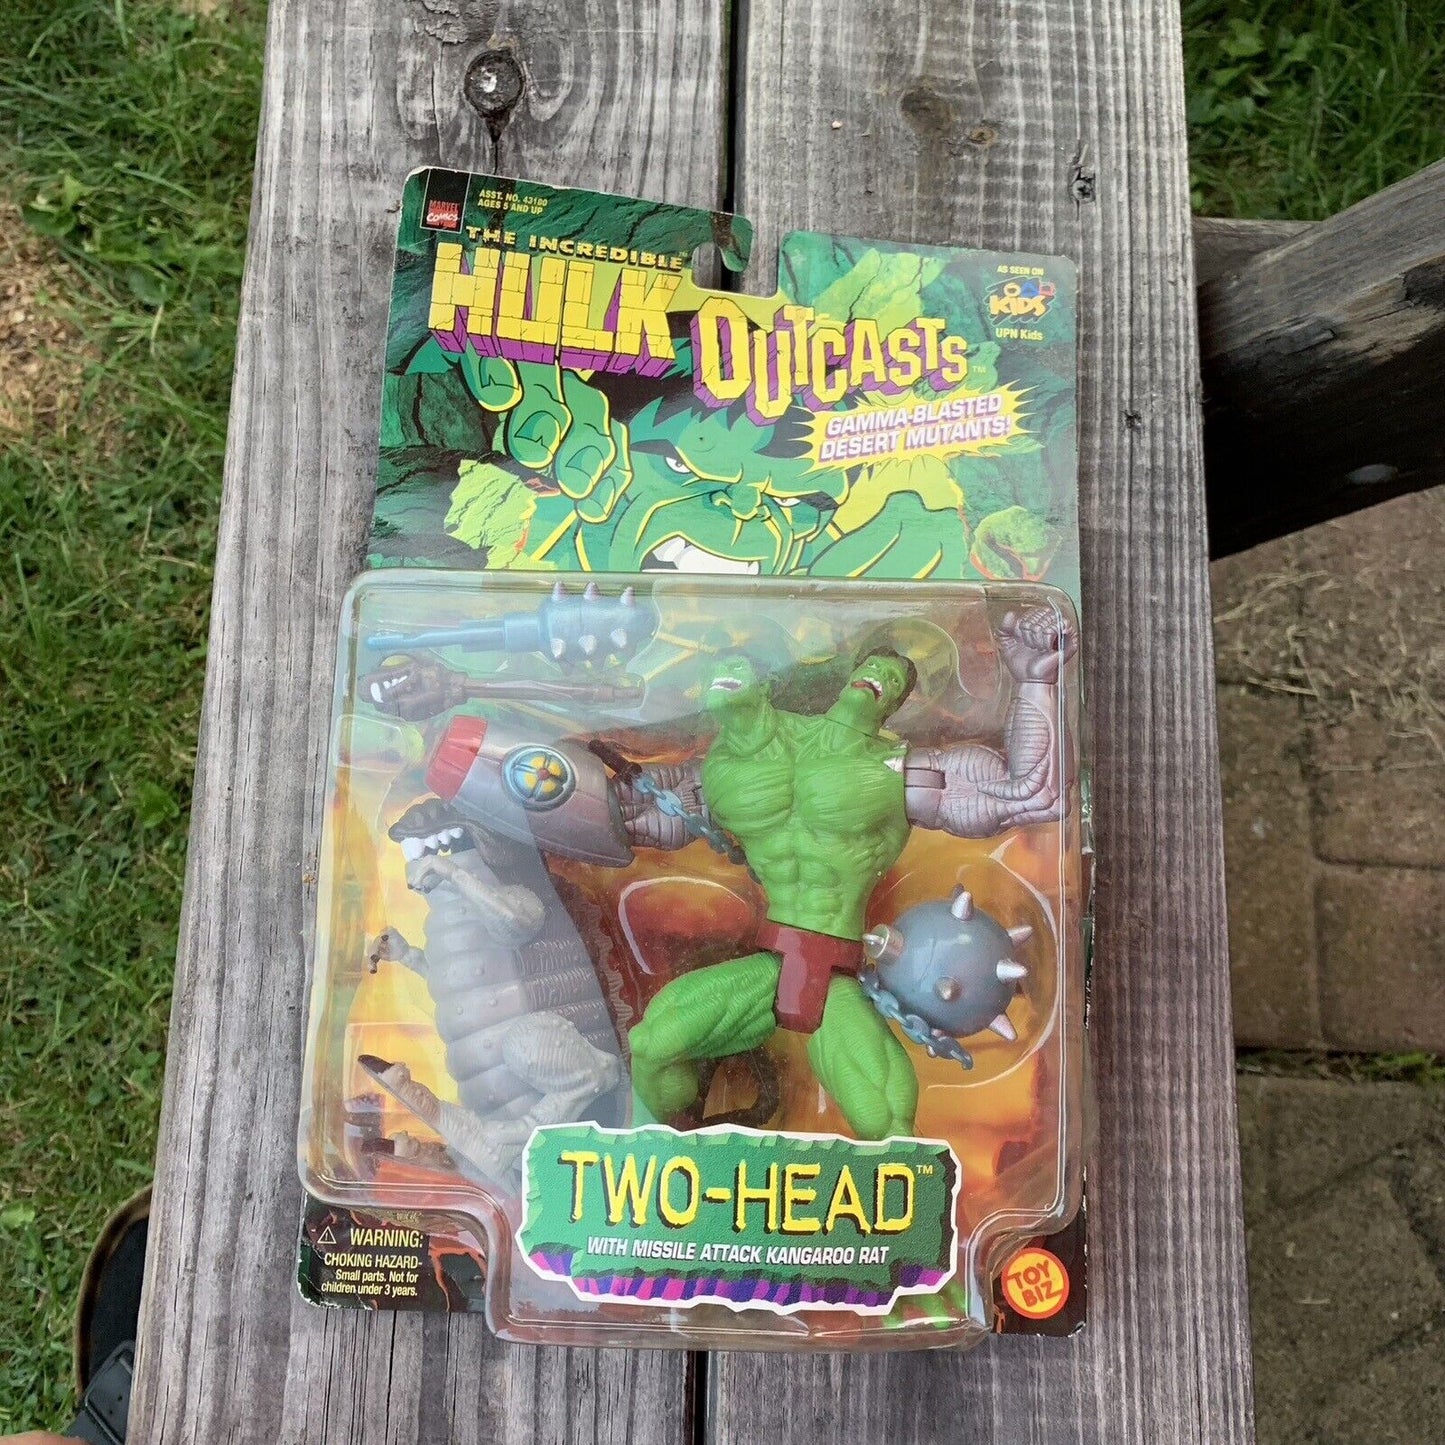 Vintage 1997 The Incredible Hulk Outcasts Two-Head Toy Action Figure Toy Biz New